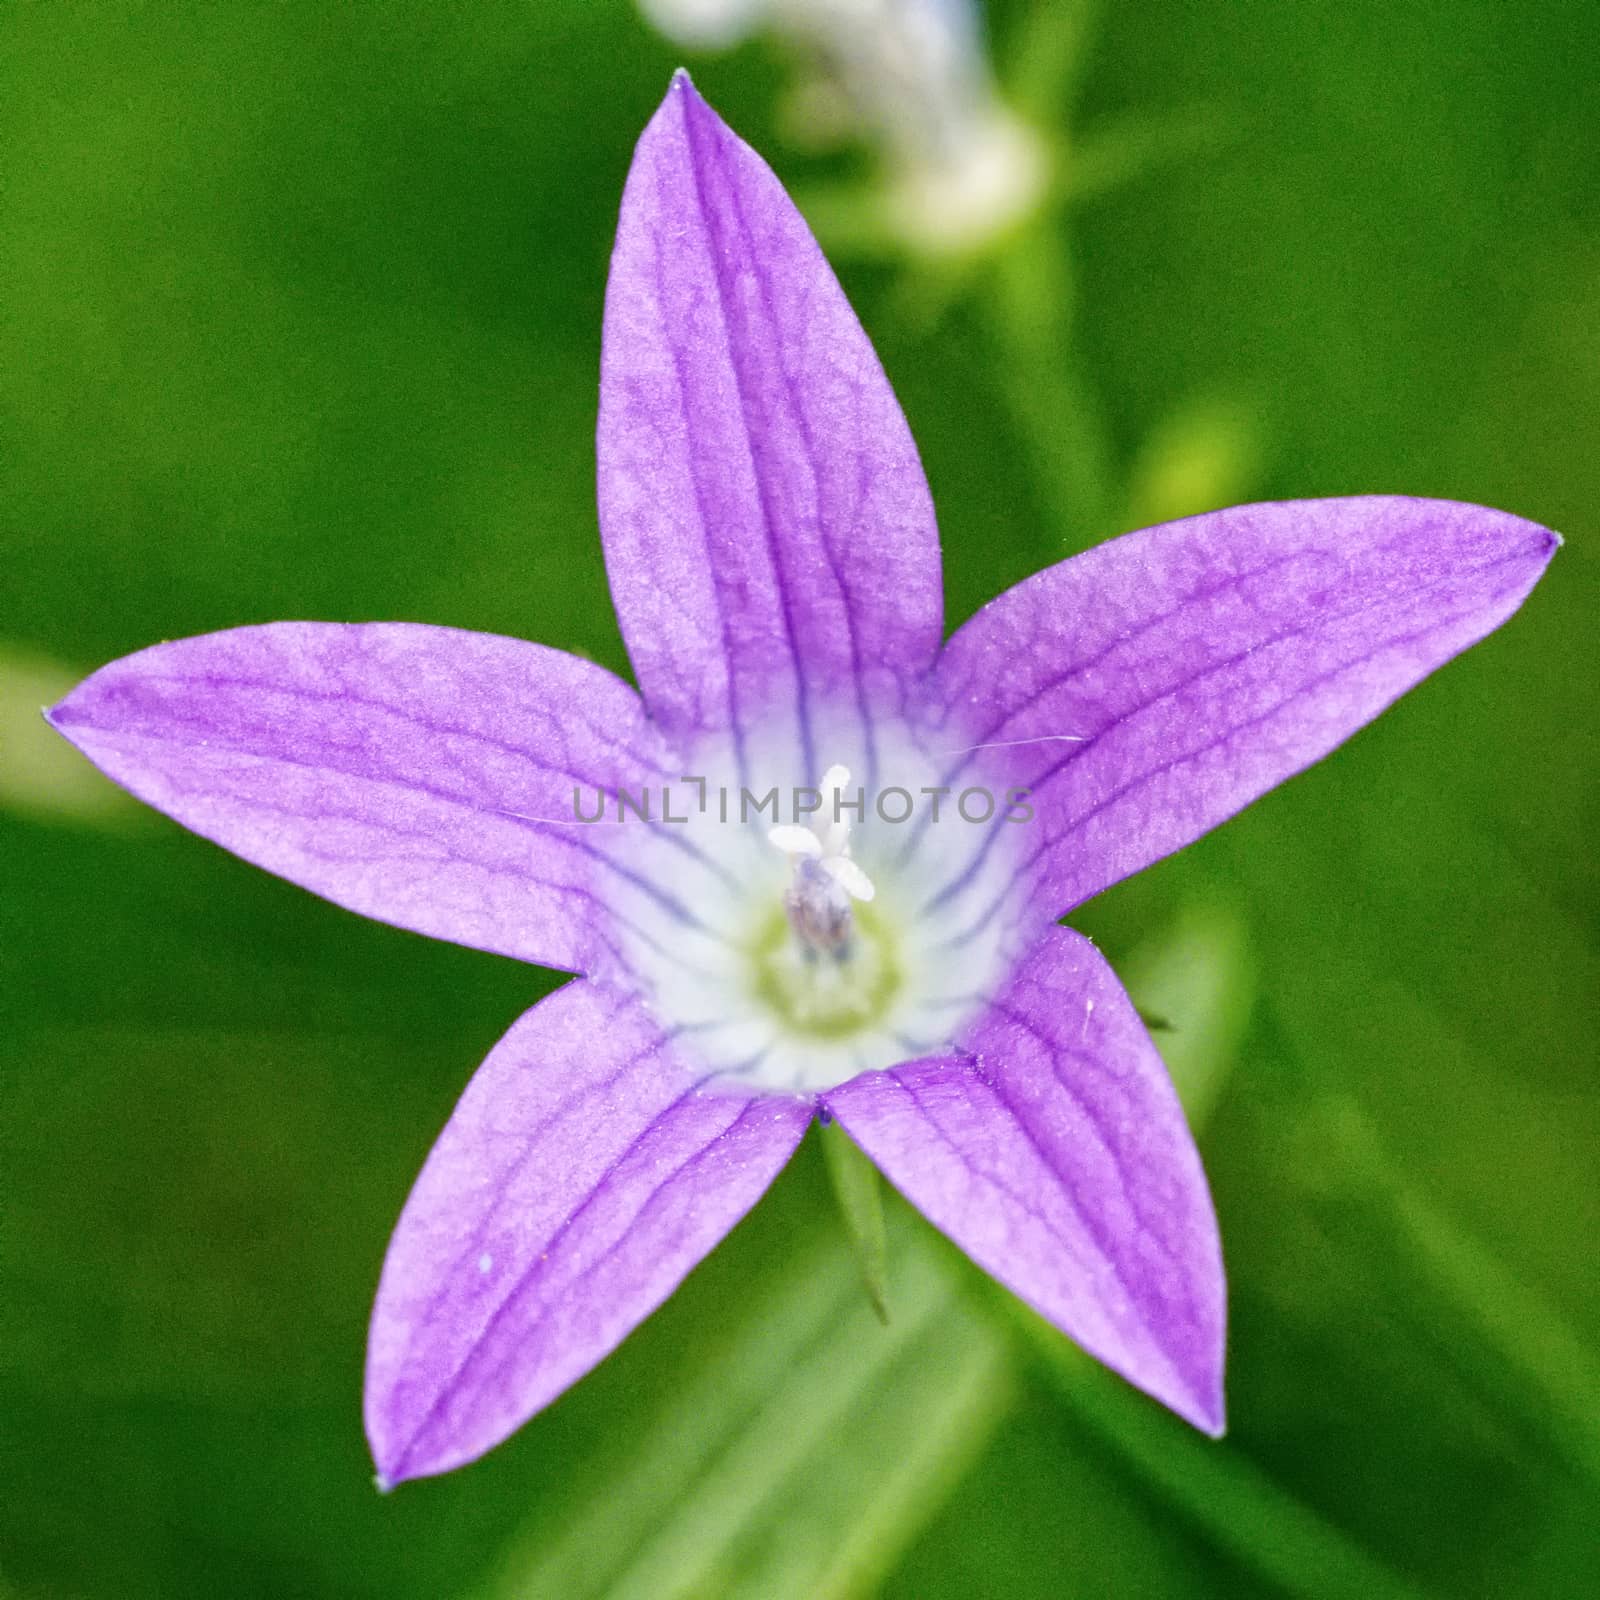 Nice blooming violet flowers on the blurred brown background